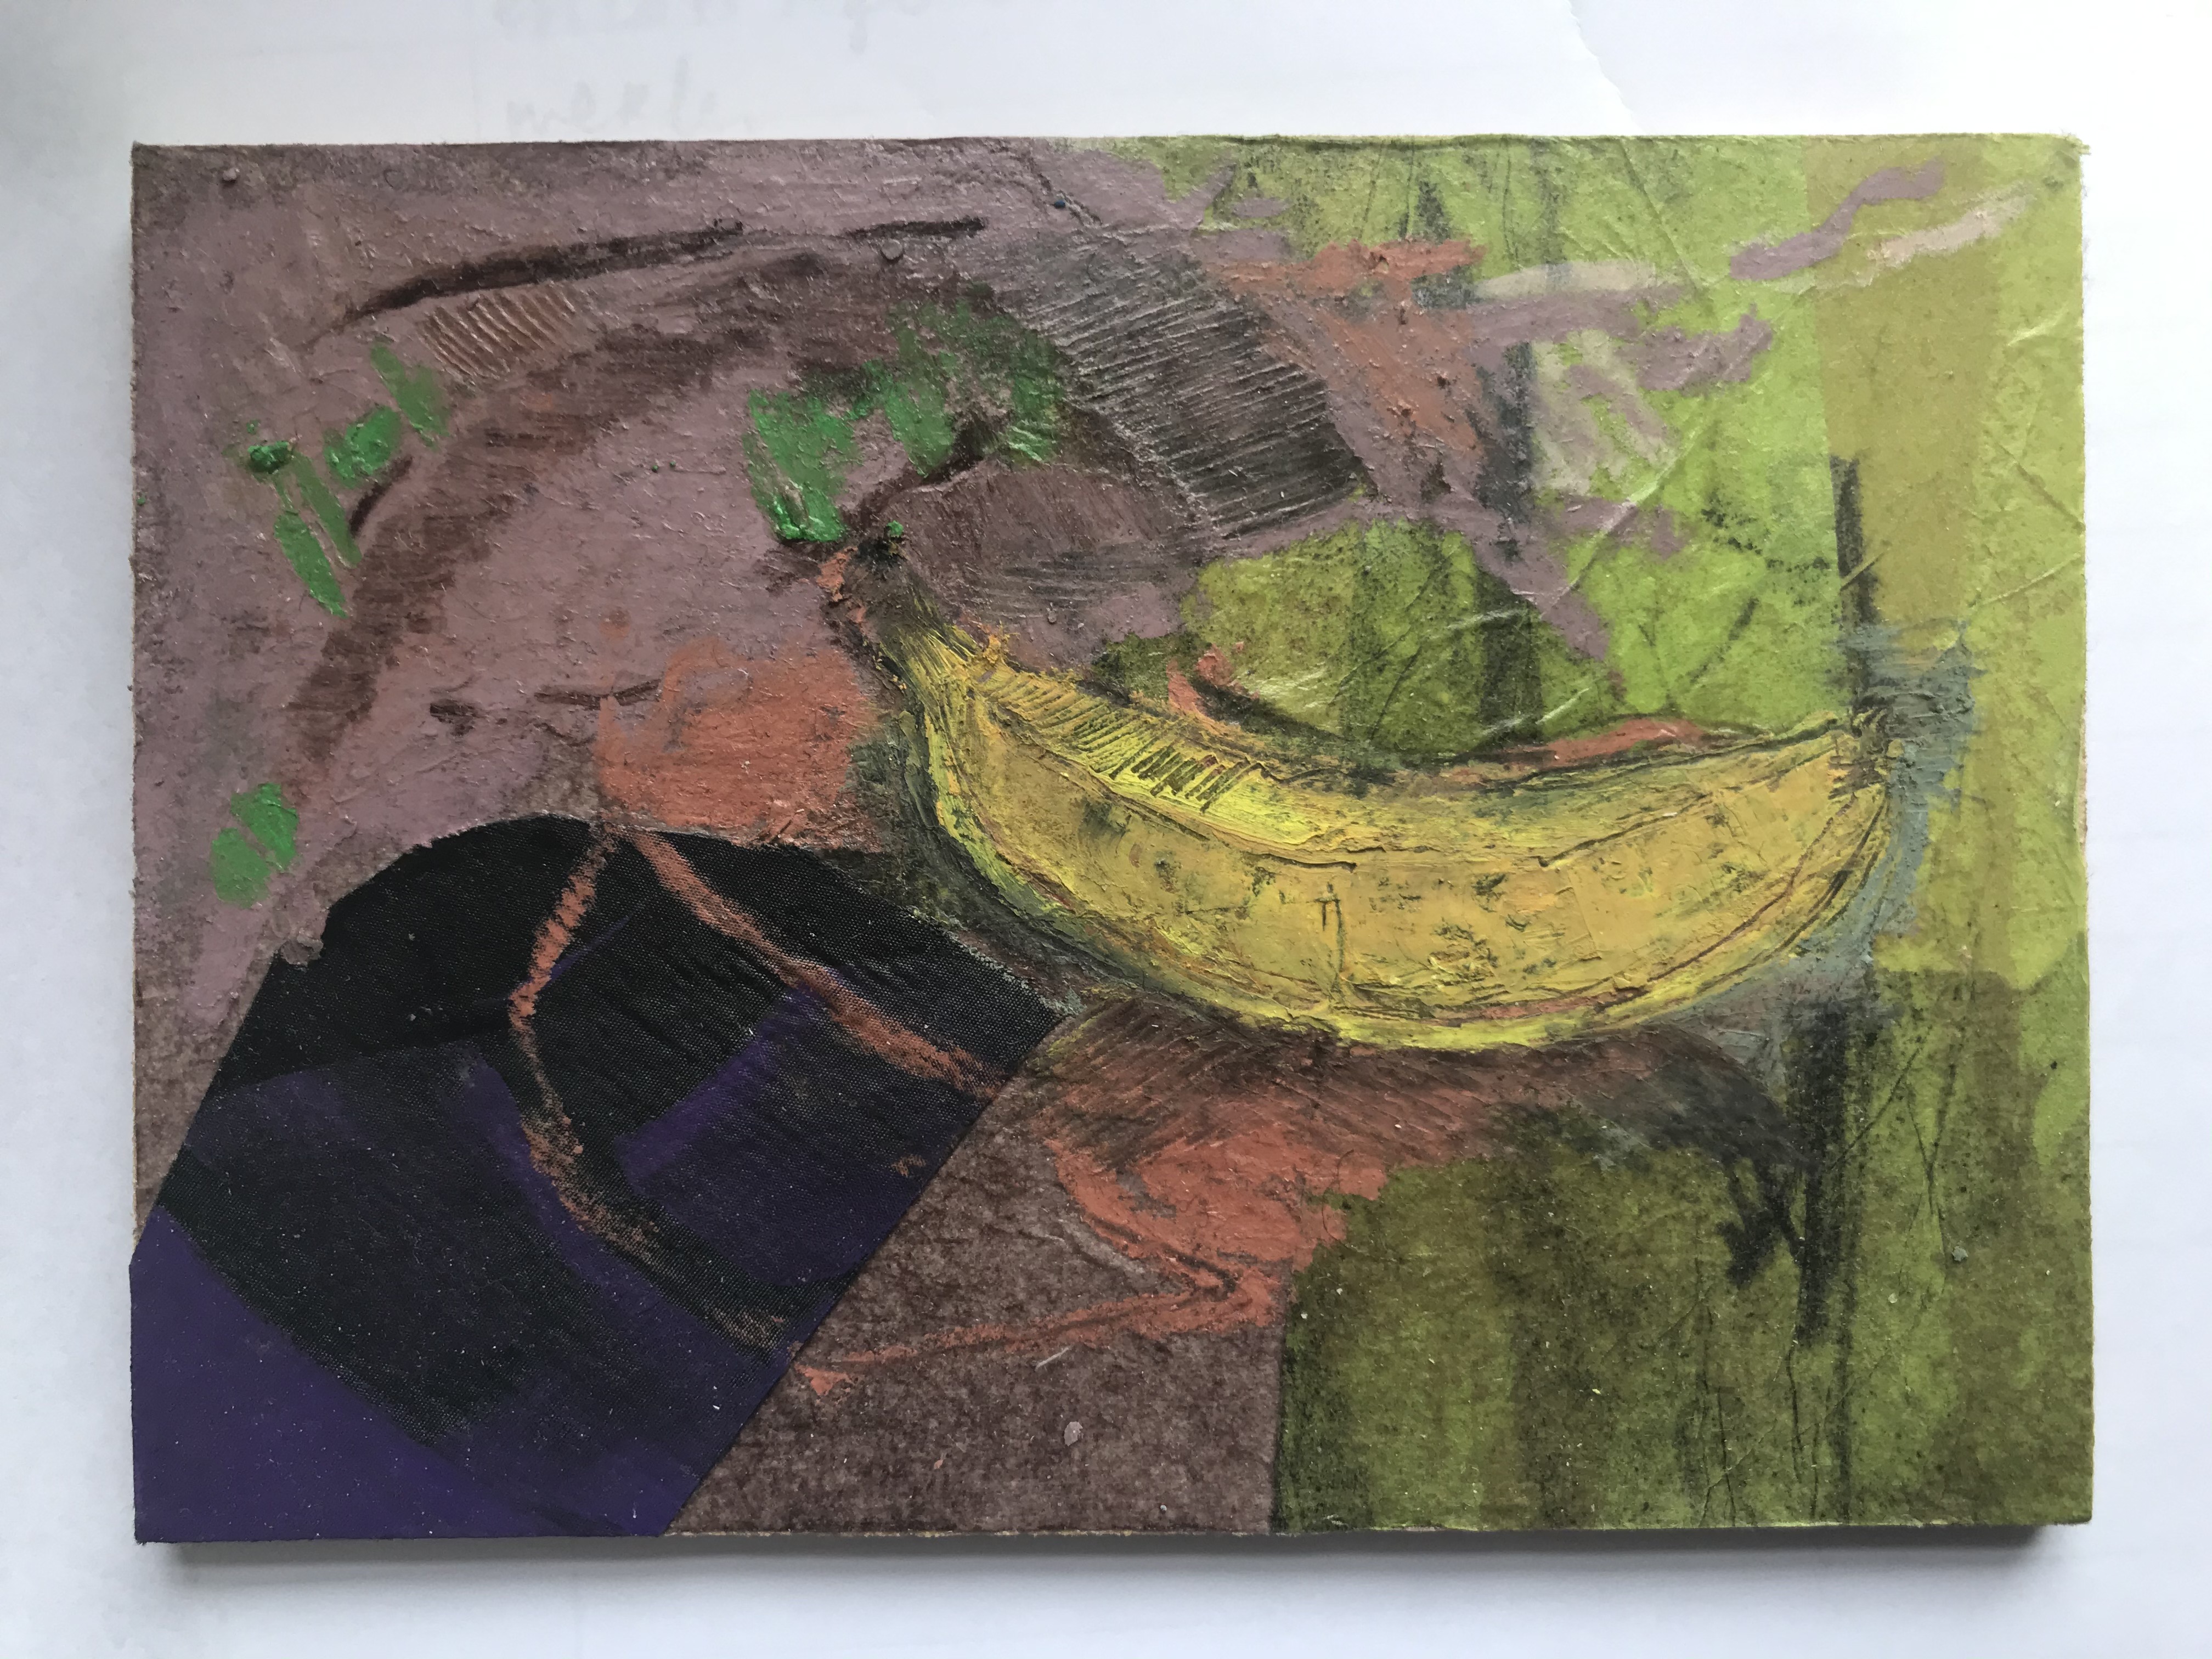 The last Banana, 2021 Oil and mixed media on MDF board showing a banana on the right, on a lime green background. The left side is purple and contains collaged elements also in purple.